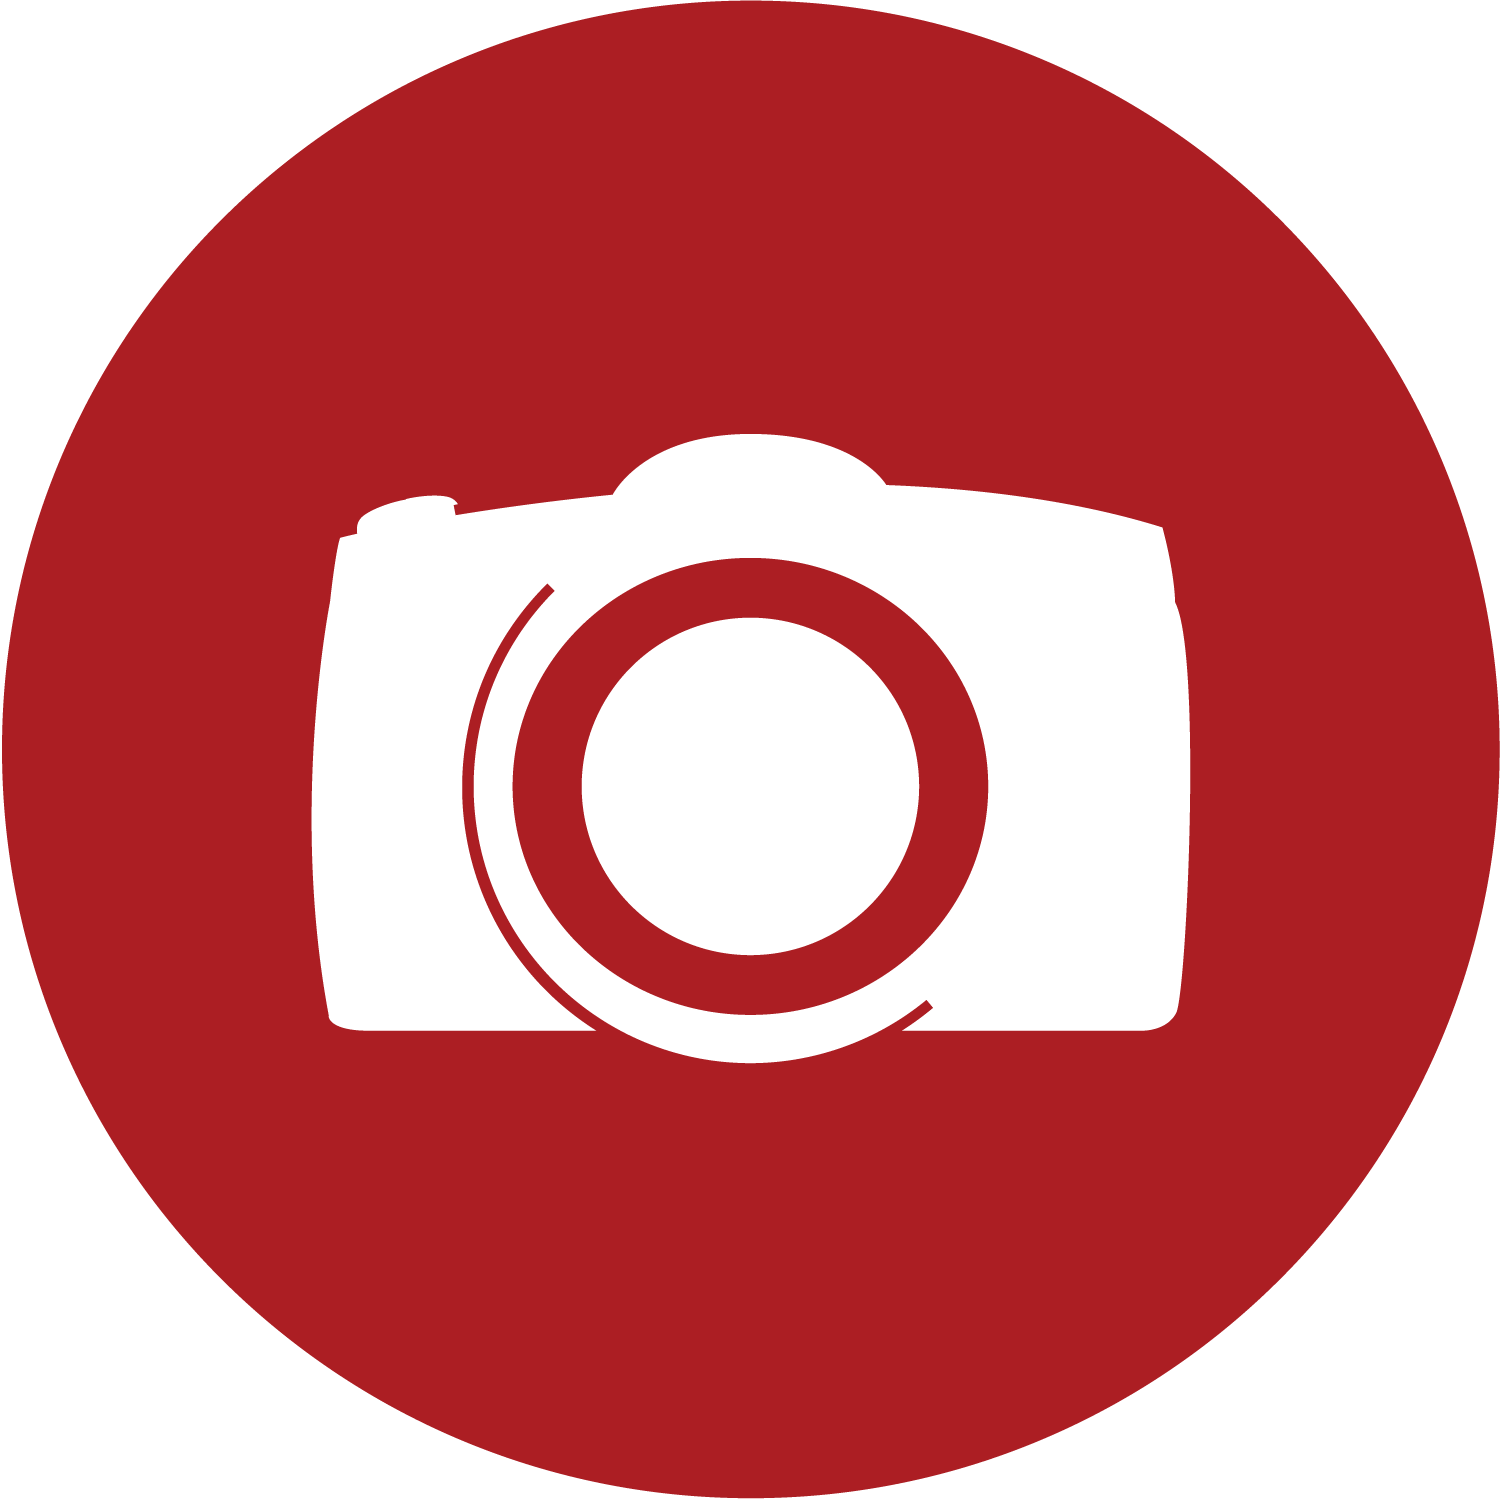 Free Camera Icon Png, Download Free Clip Art, Free Clip Art on Clipart Library